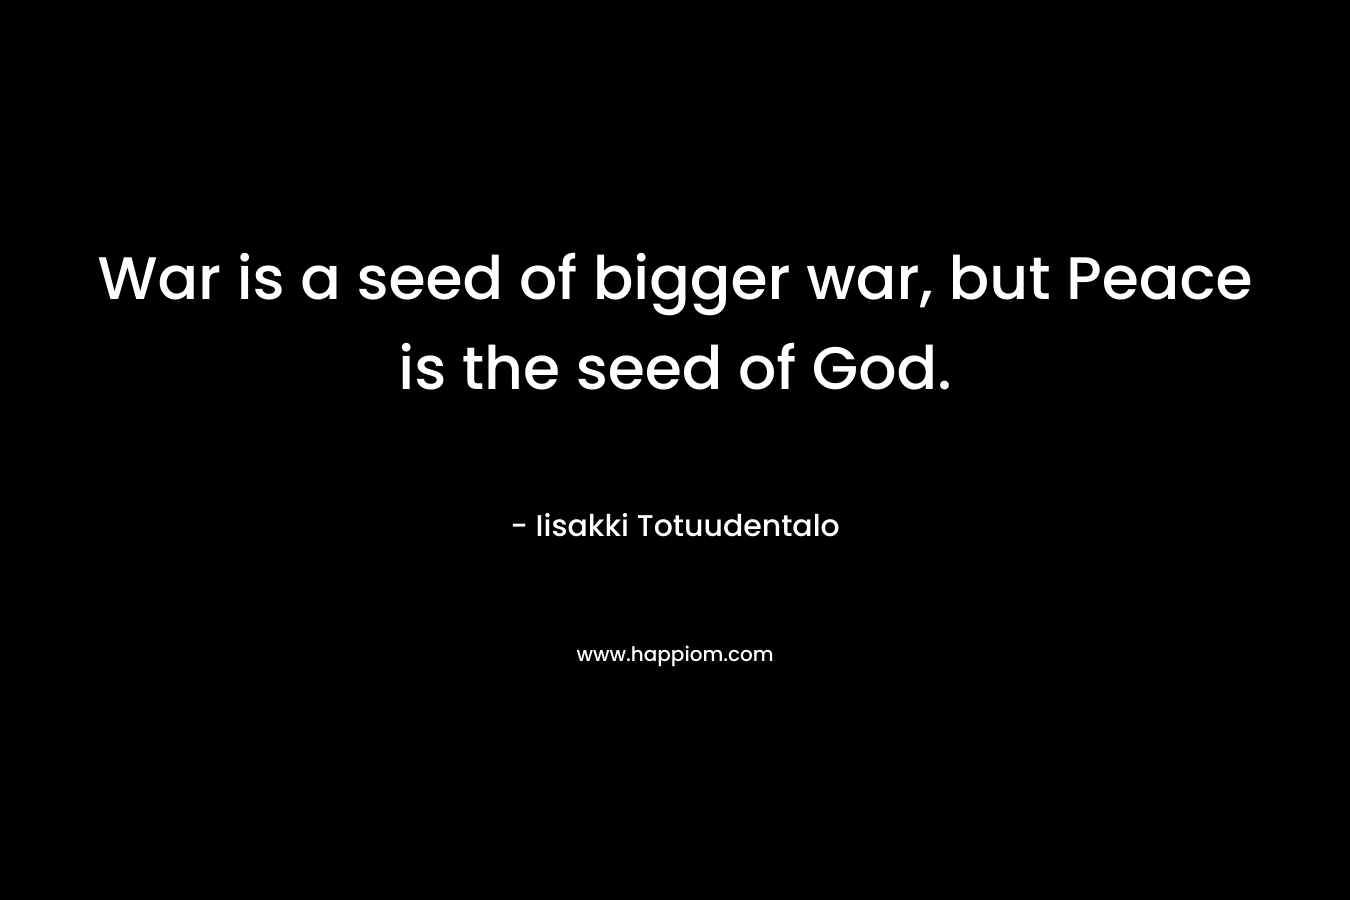 War is a seed of bigger war, but Peace is the seed of God.